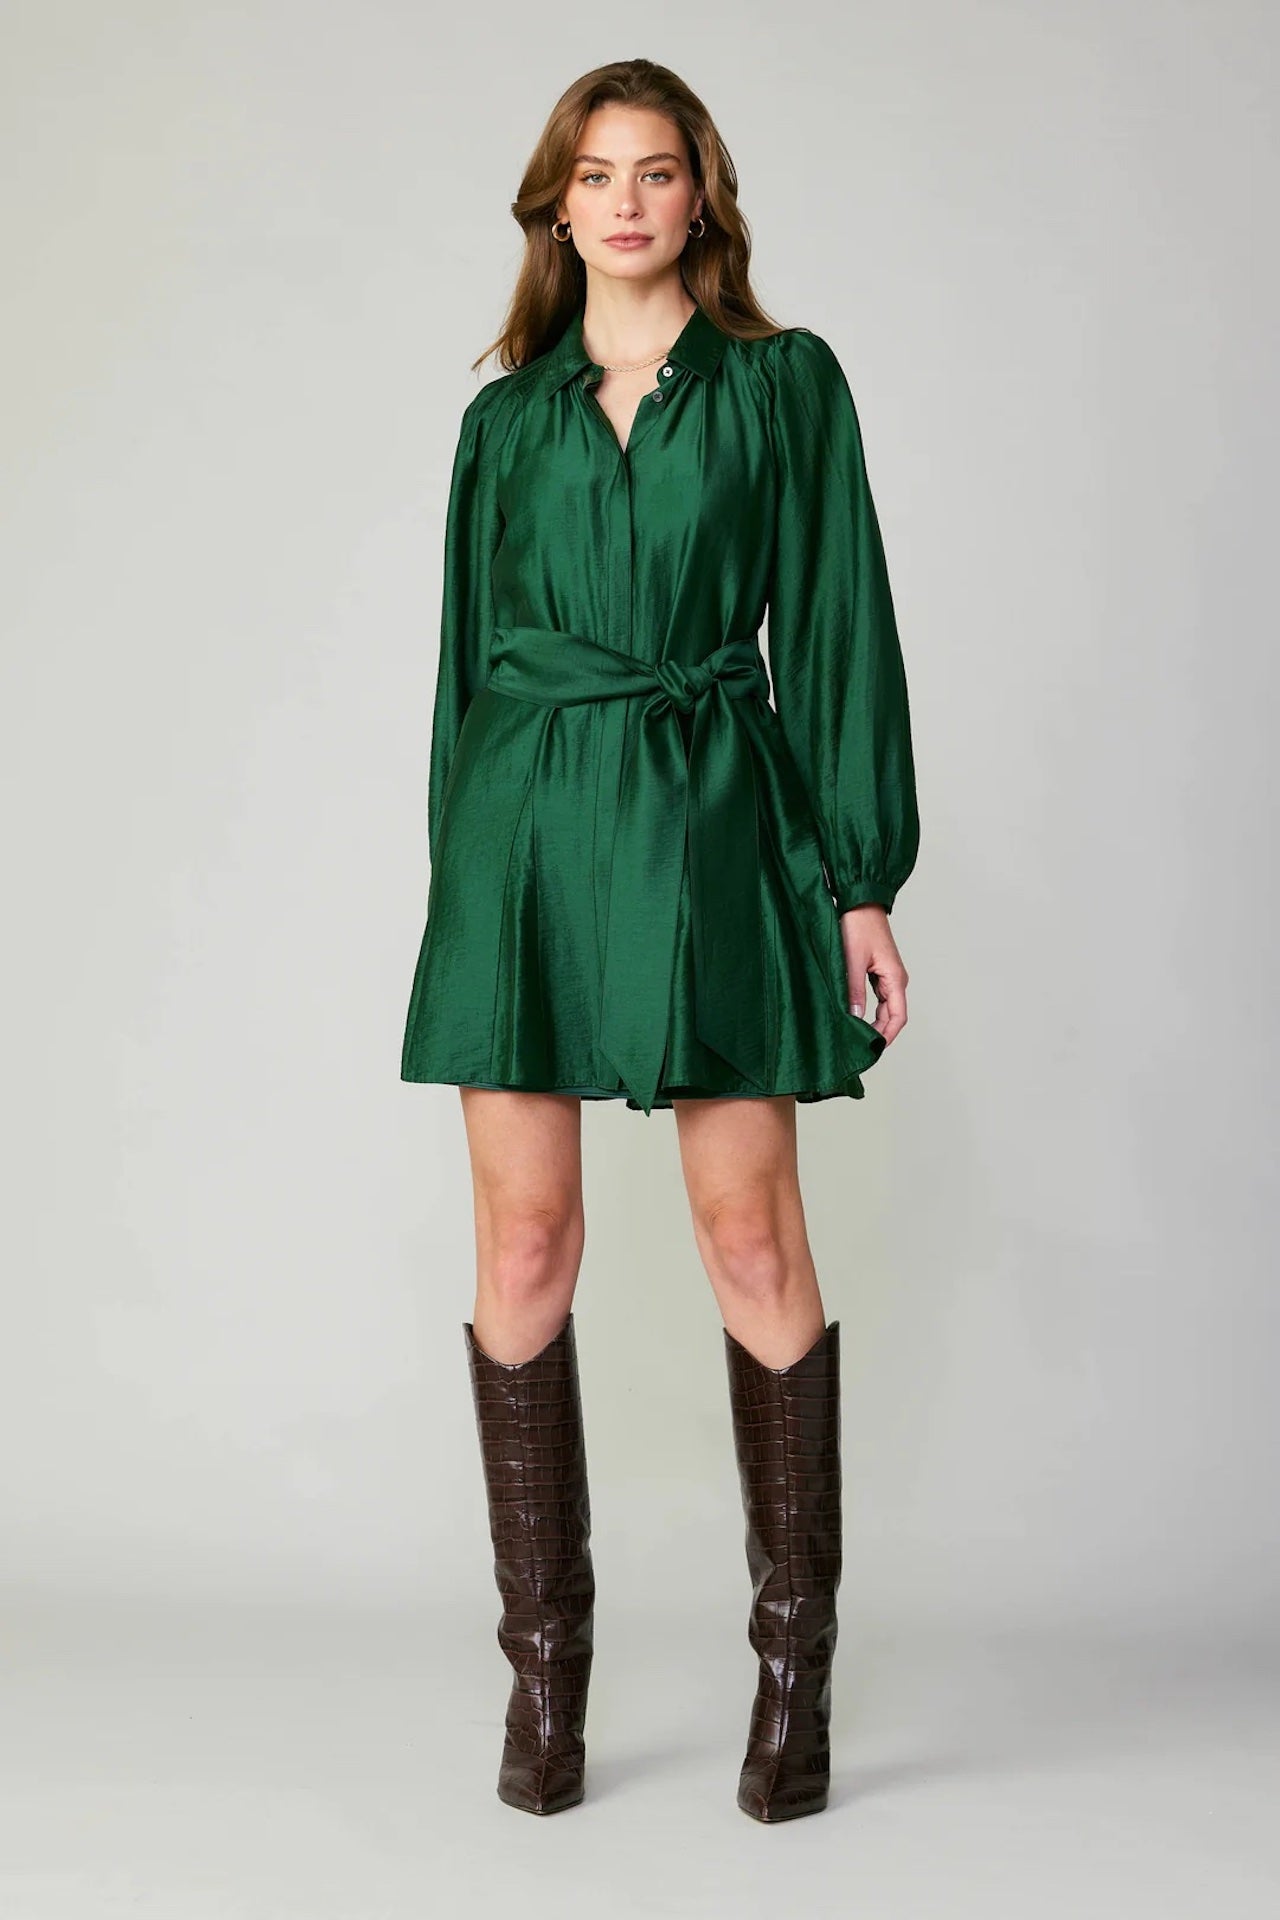 long sleeve green belted mini dress with a collar